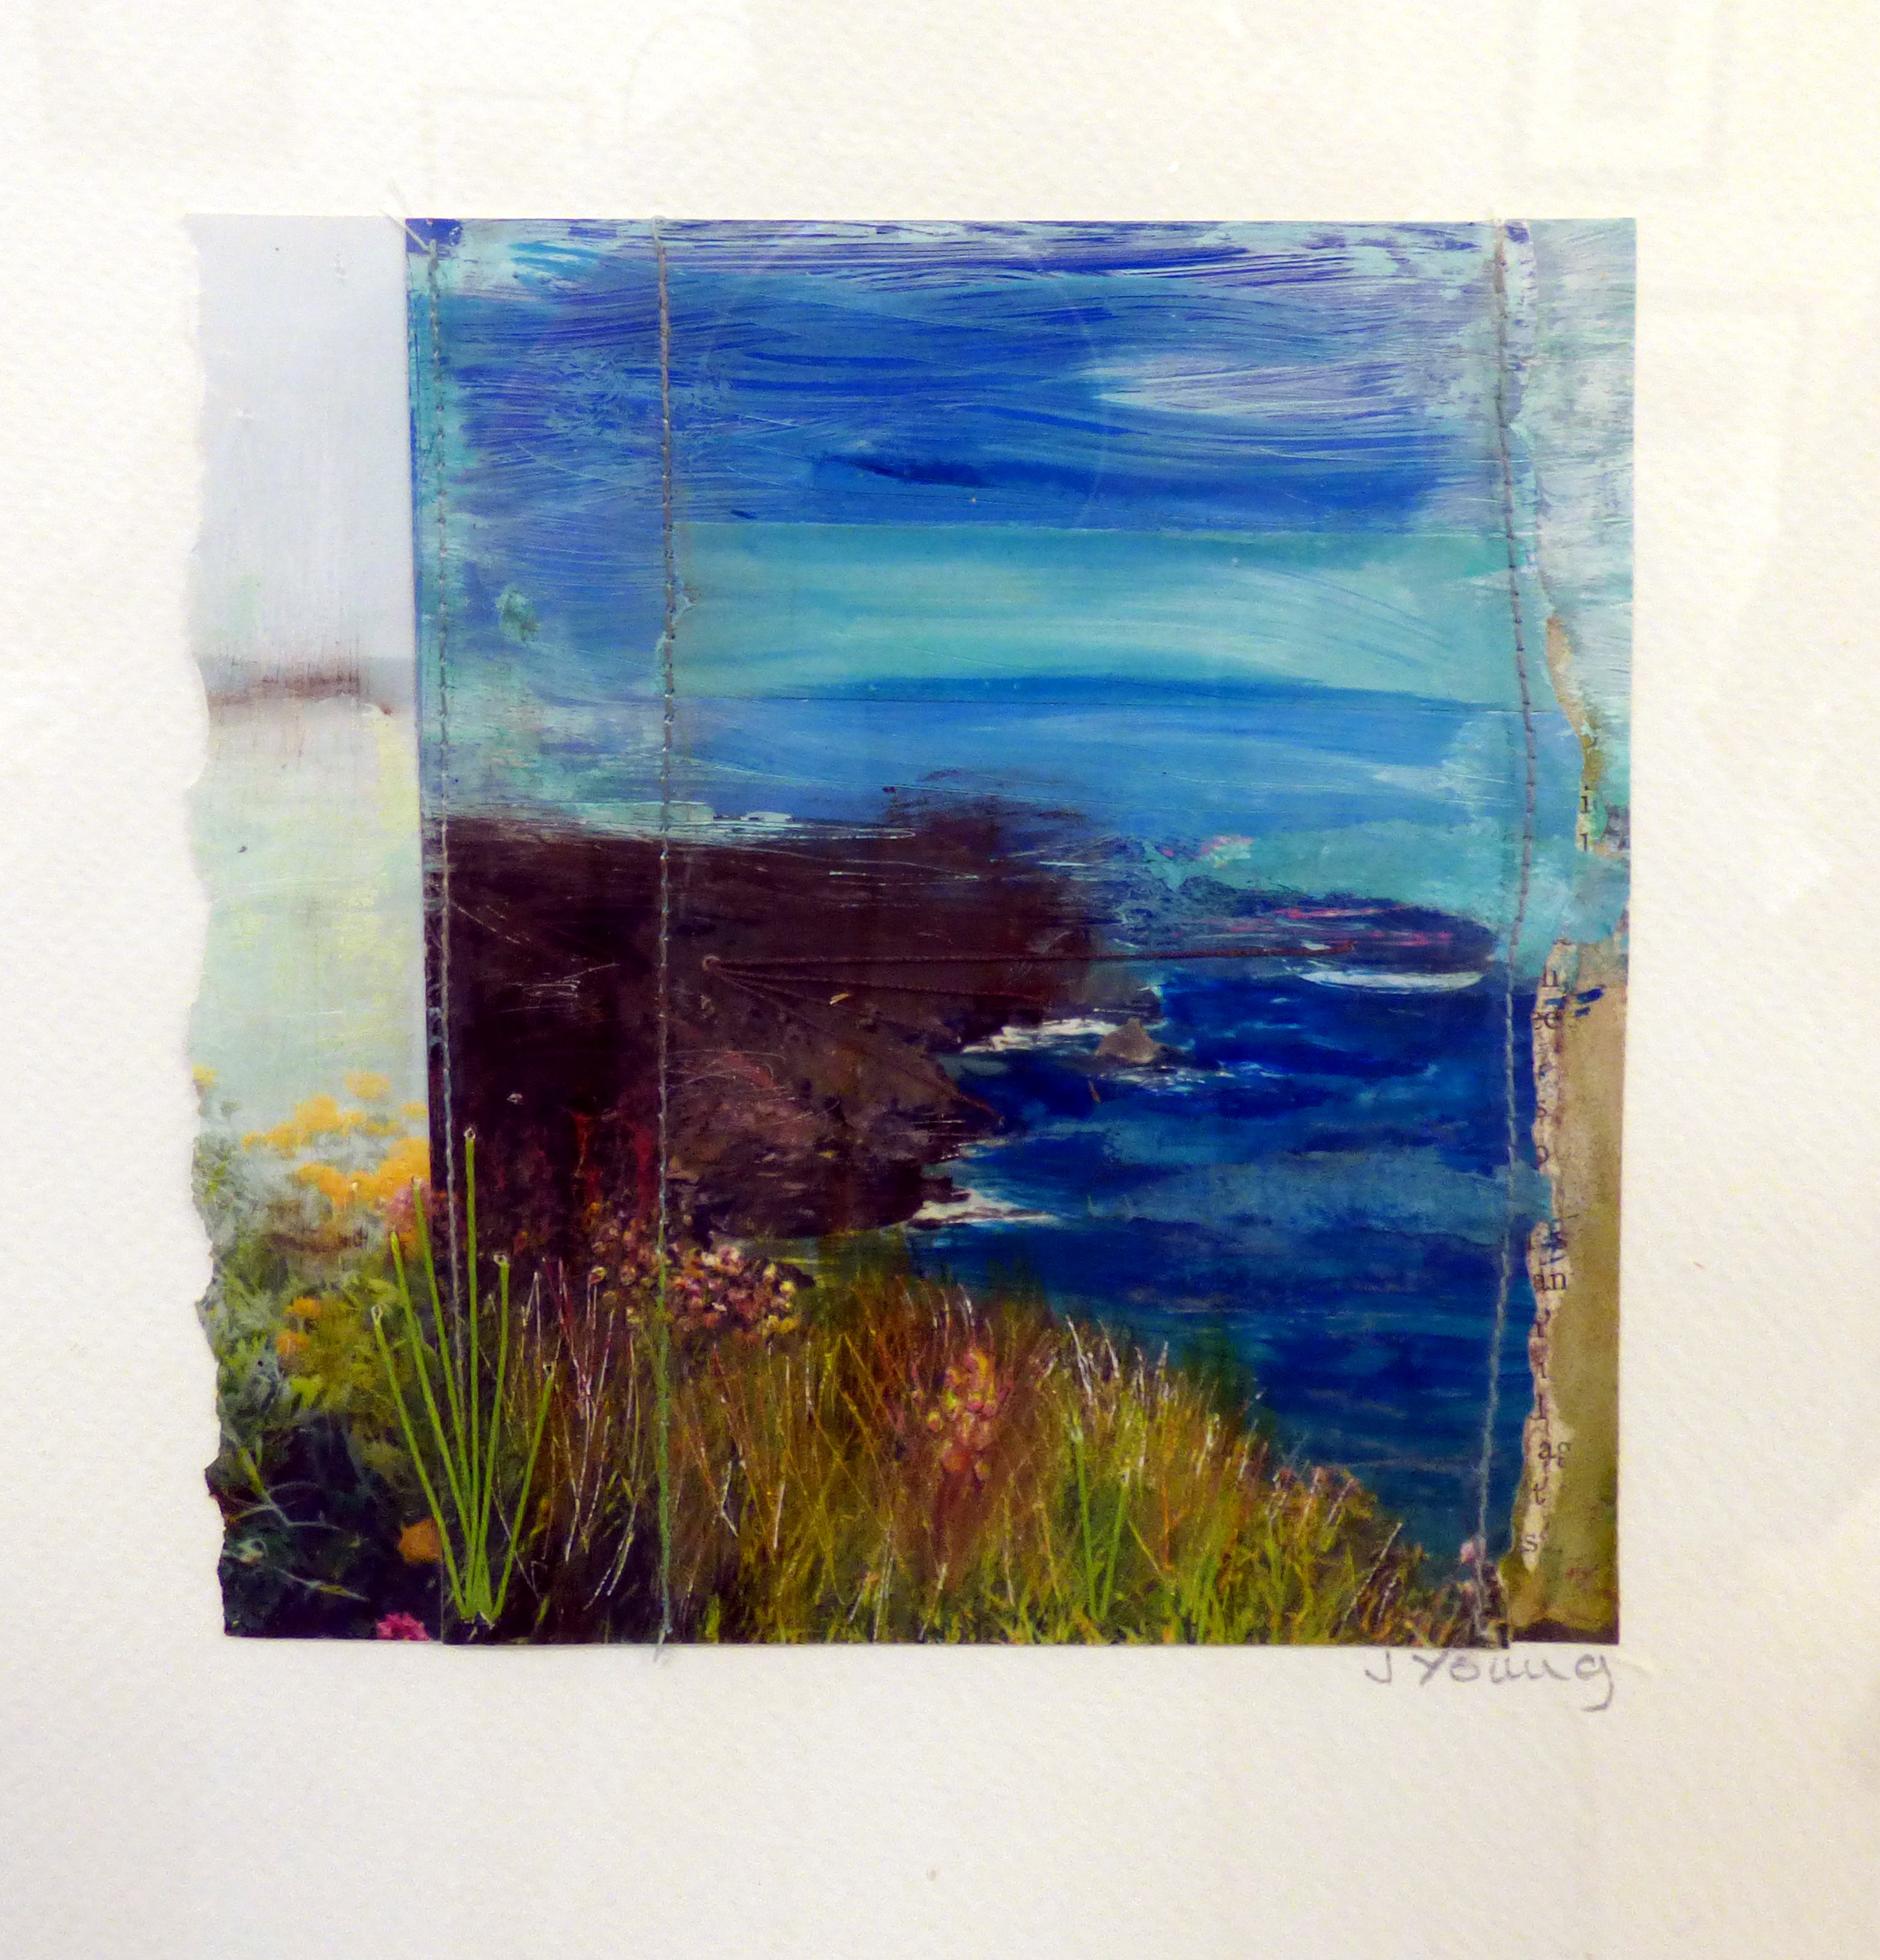 CORNISH COAST 4 by Joyce Young, altered photographs and stitch, ConText group 2018